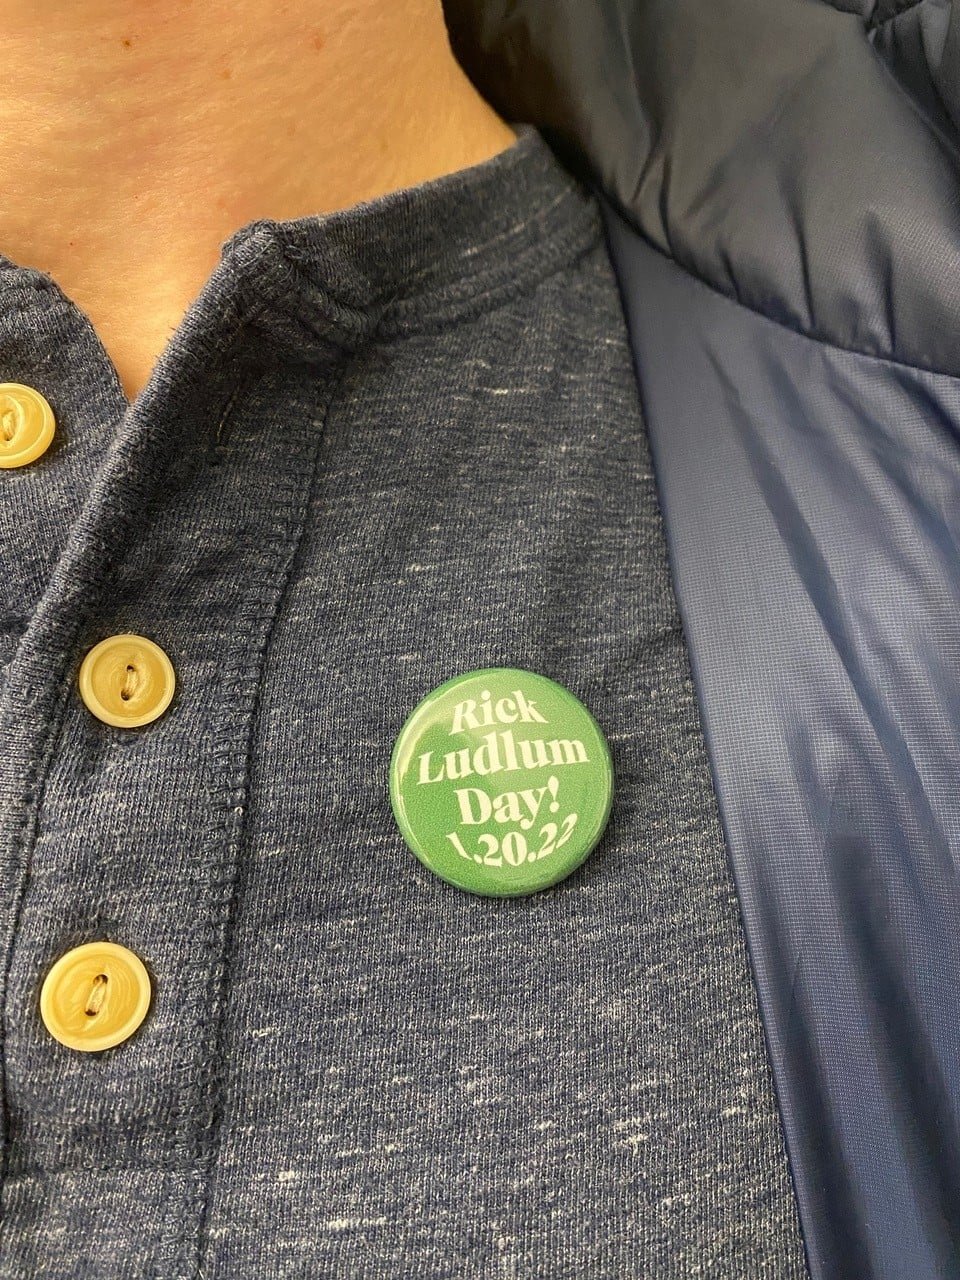 Rick Ludlum Day pins custom-made thanks to Cole Imperi!